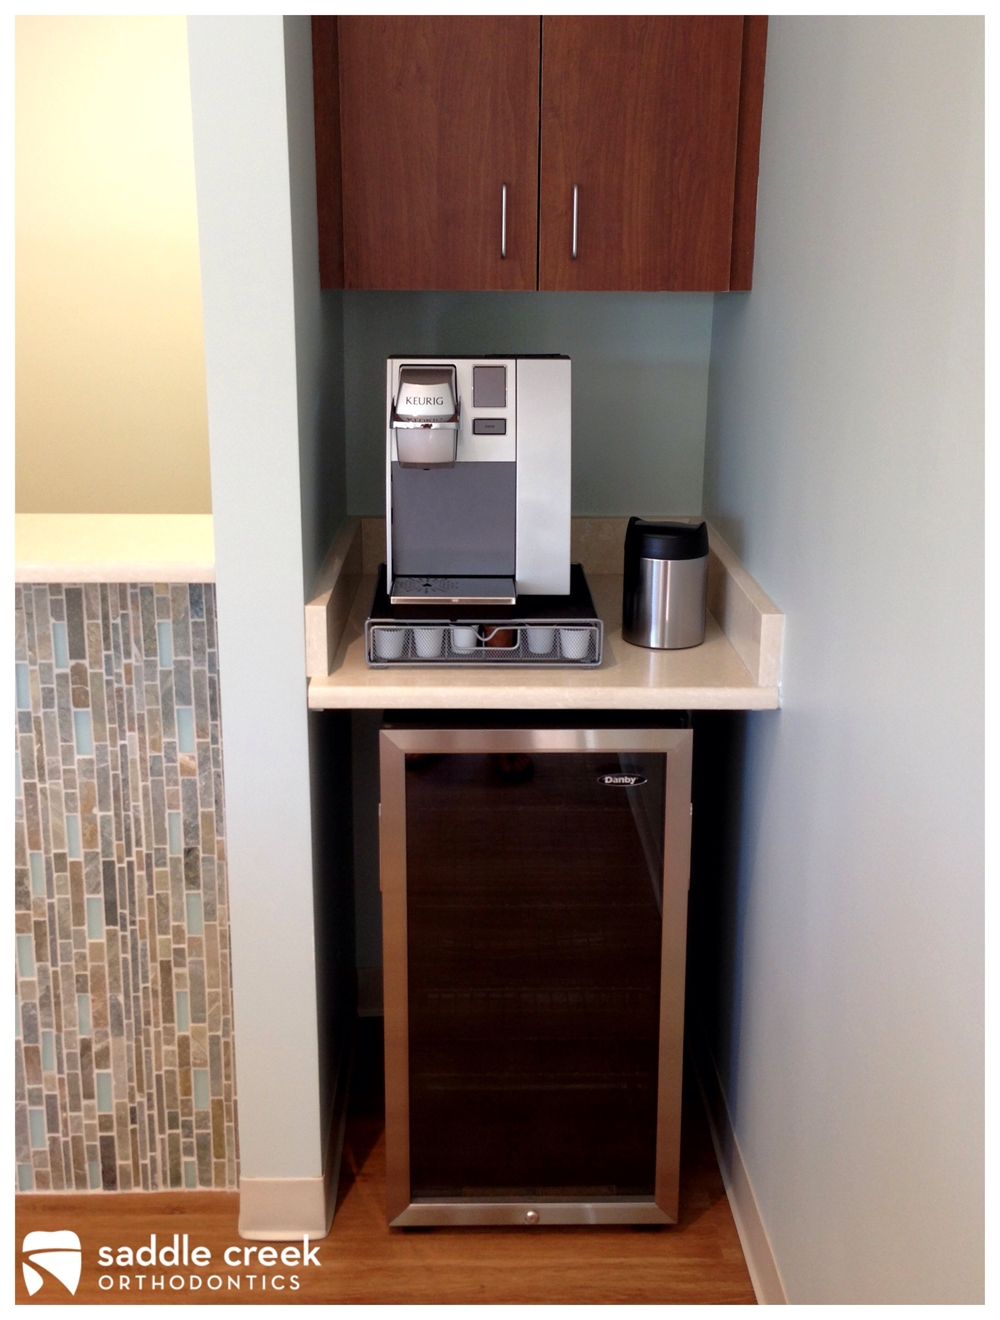 Orthodontic drink station with Keurig coffee maker and fridge